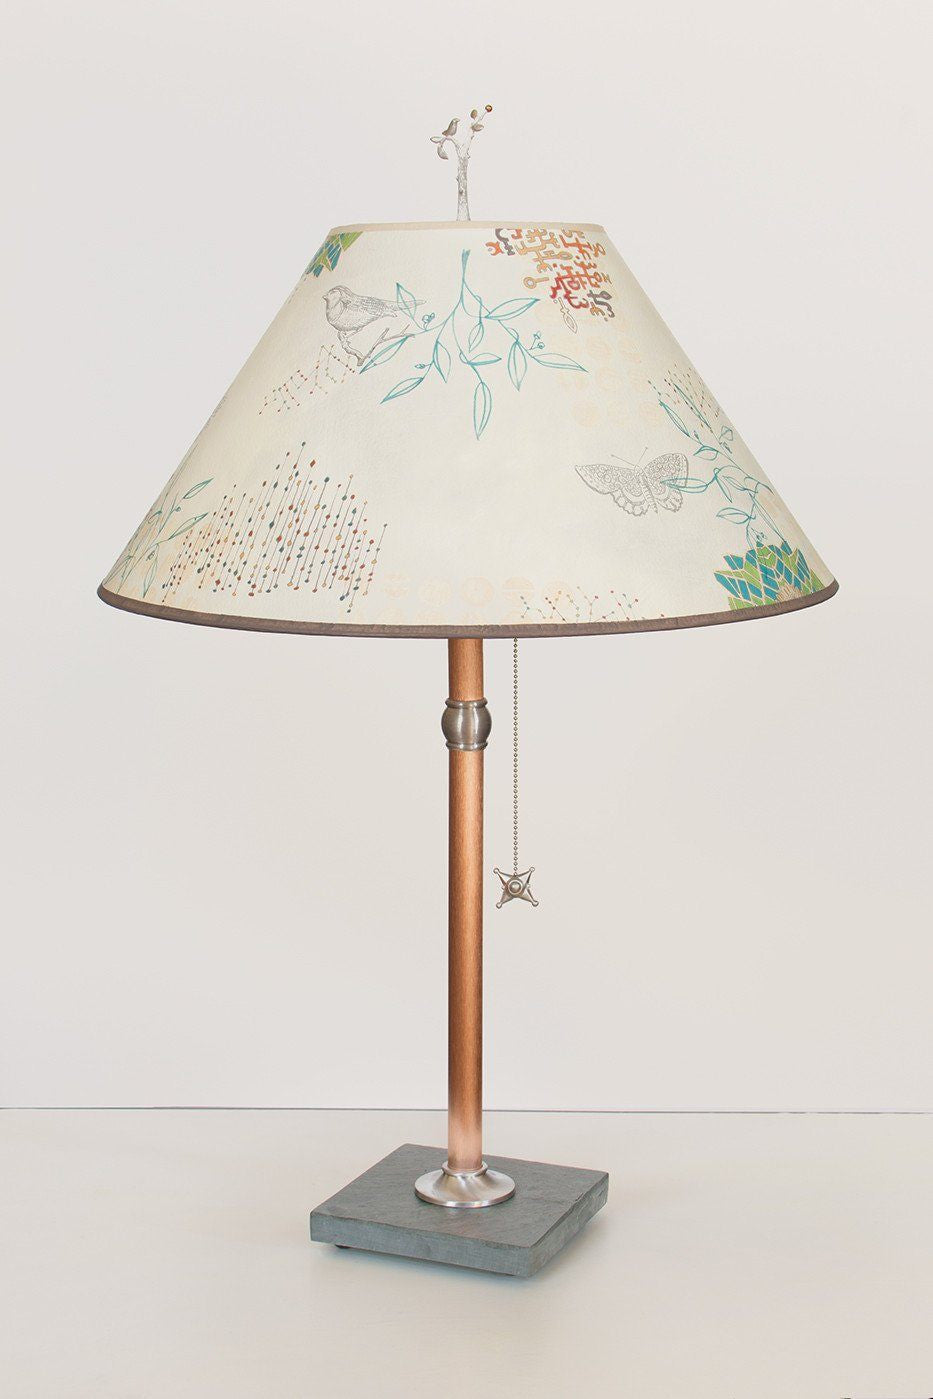 Janna Ugone &amp; Co Table Lamps Copper Table Lamp with Large Conical Shade in Ecru Journey